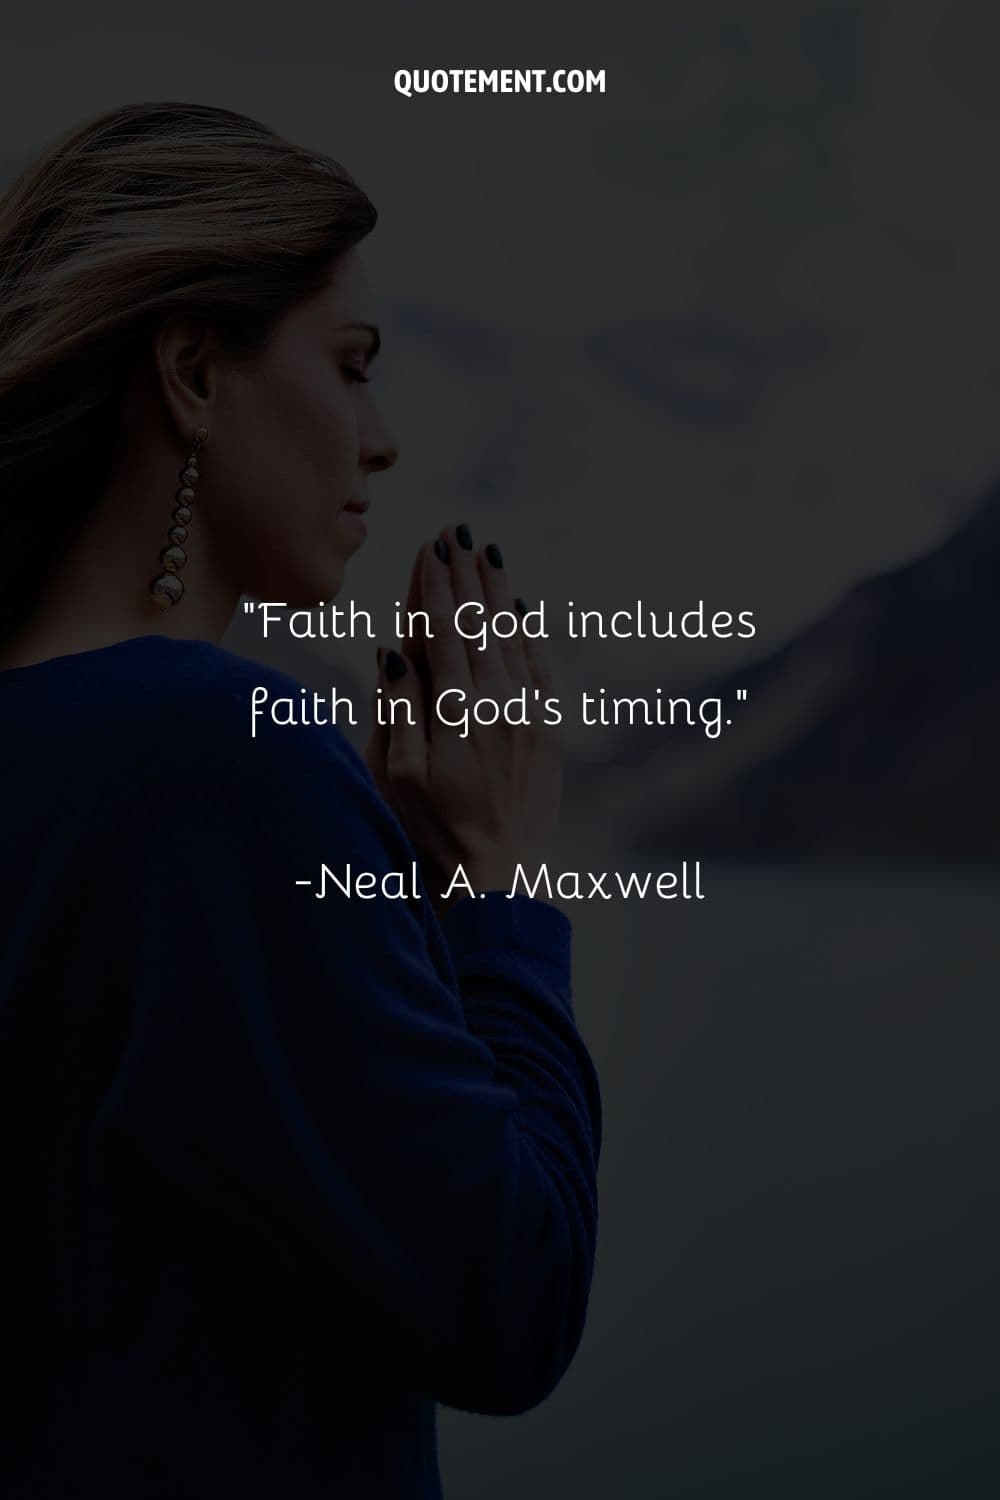 Image of a woman in meditative moment representing faith in God quote.